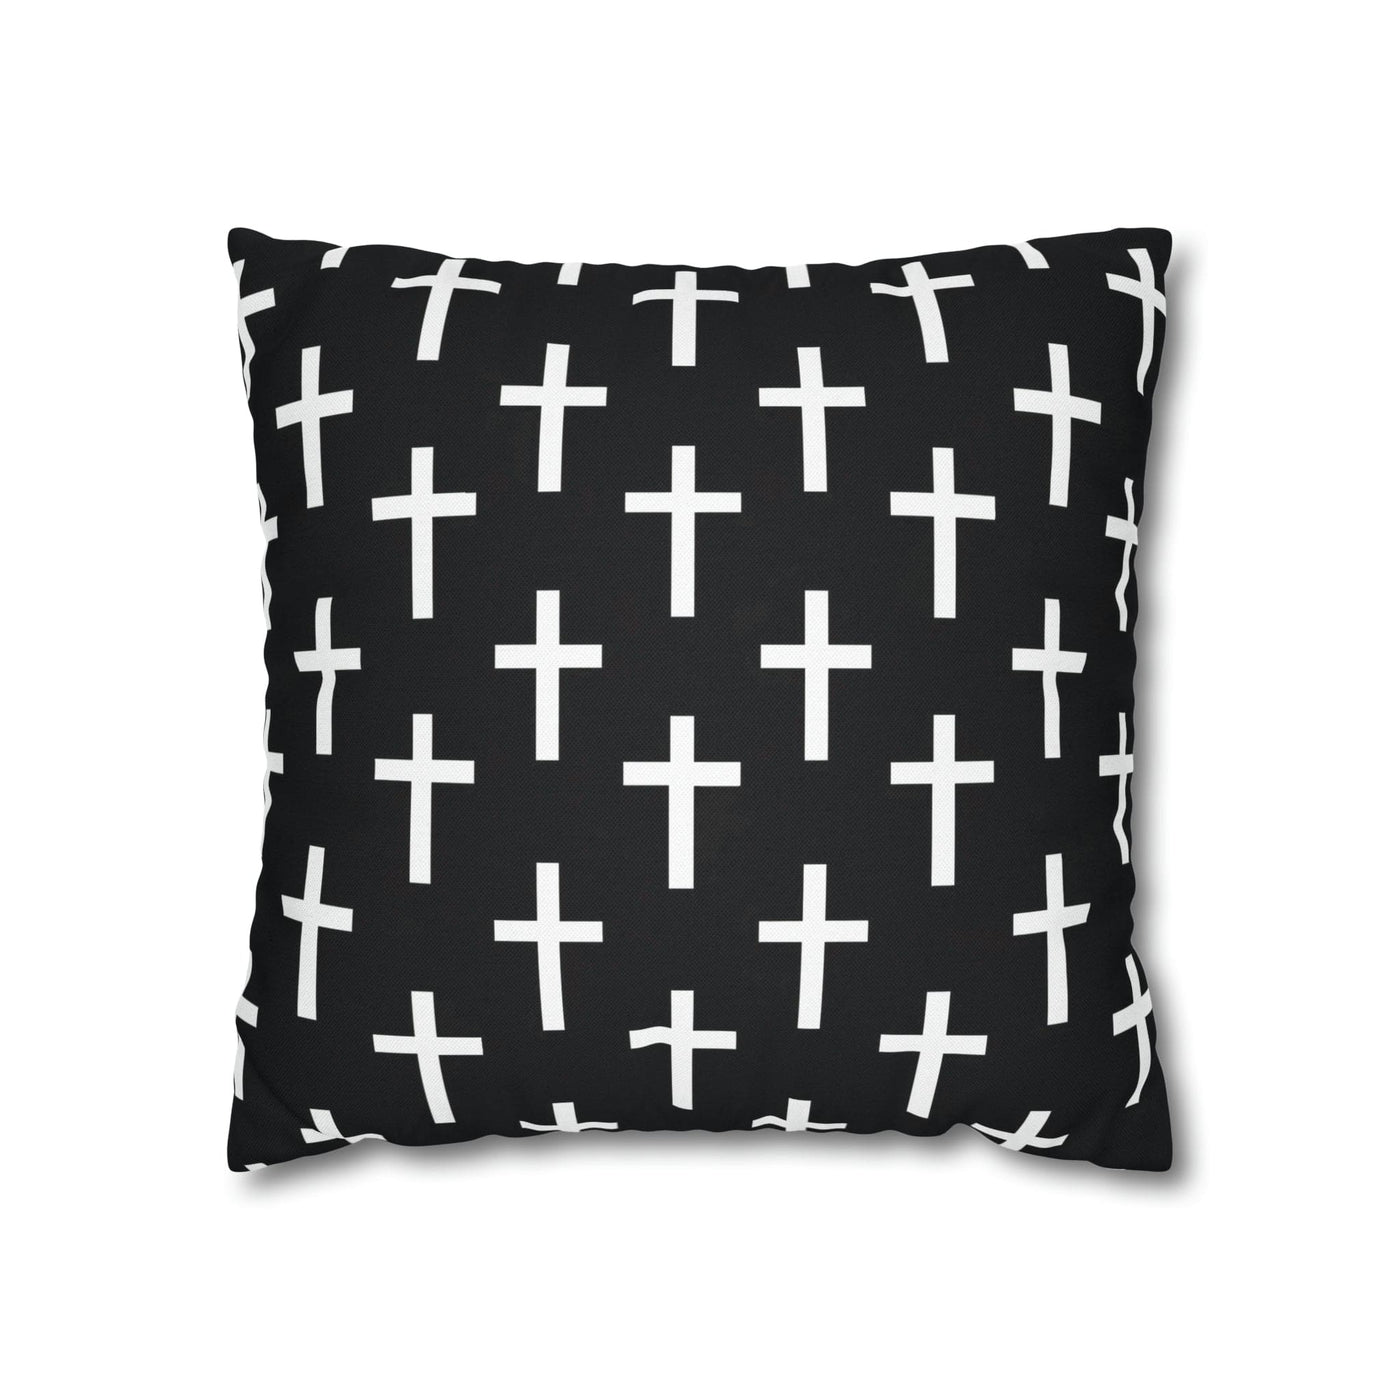 Decorative Throw Pillow Covers With Zipper - Set Of 2 Black And White Seamless